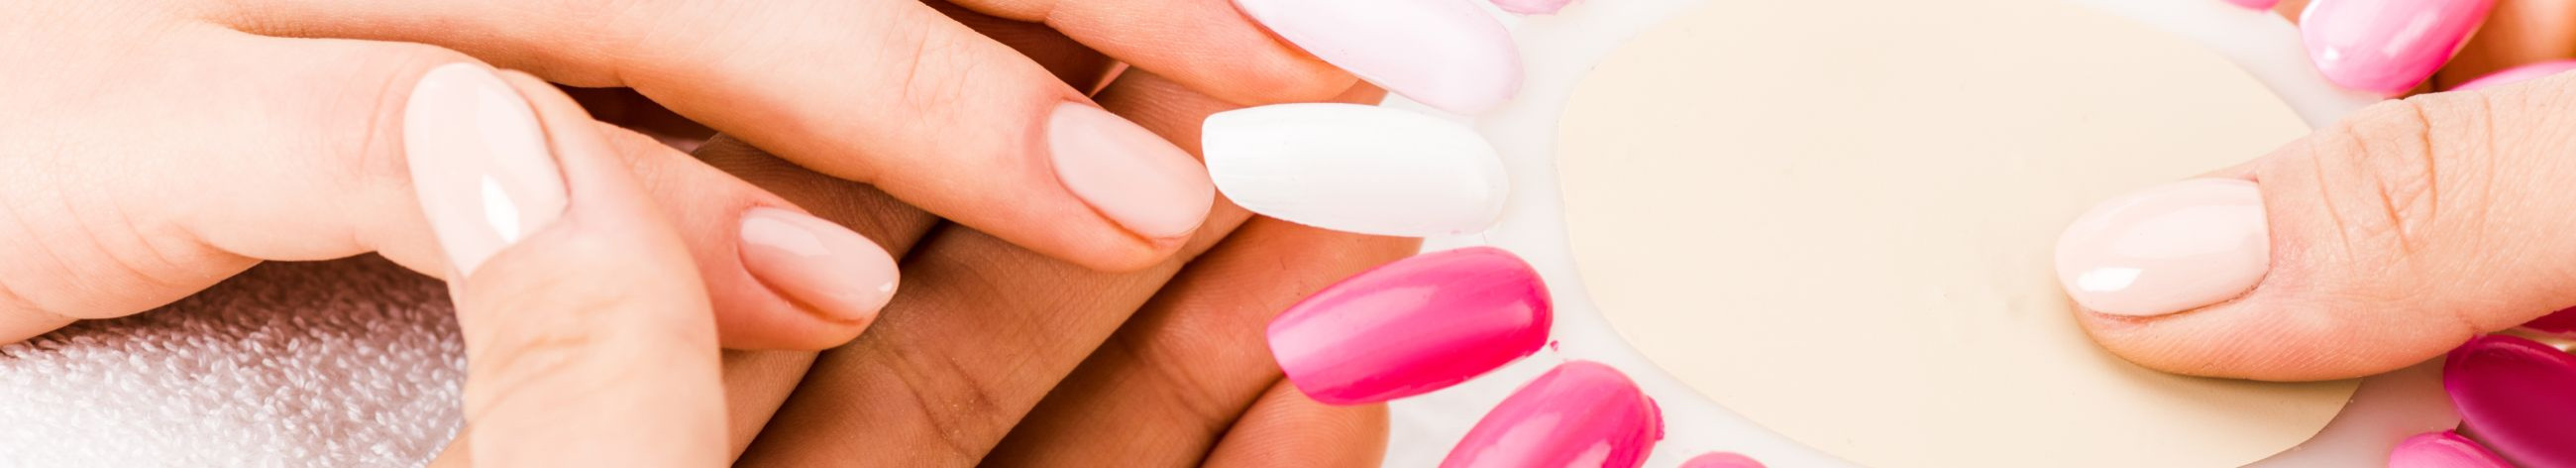 We provide professional nail care services with a focus on gel nail applications.